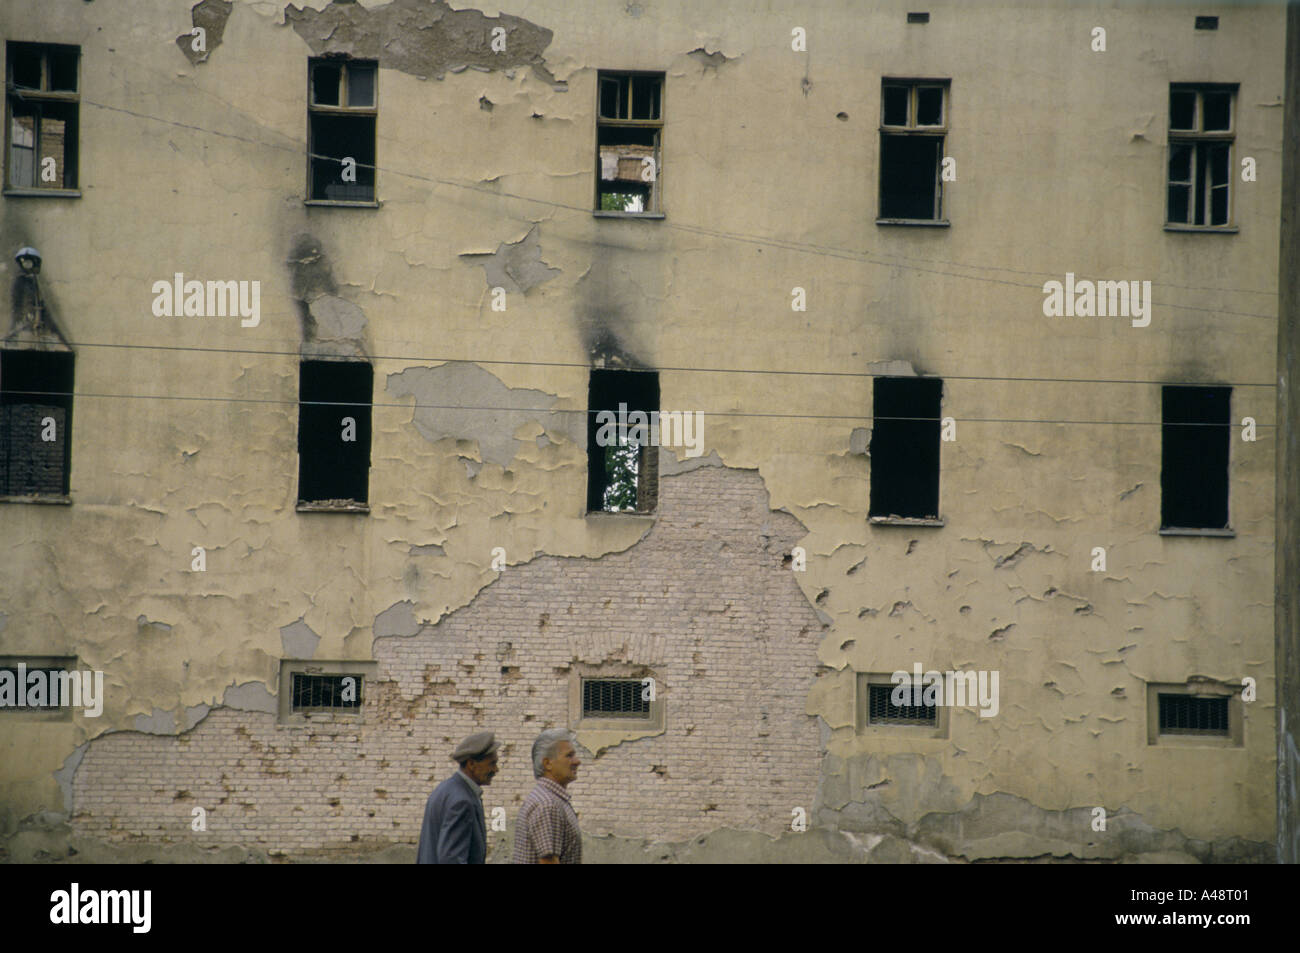 two men walking past burnt out building sarajevo july 1994 Stock Photo